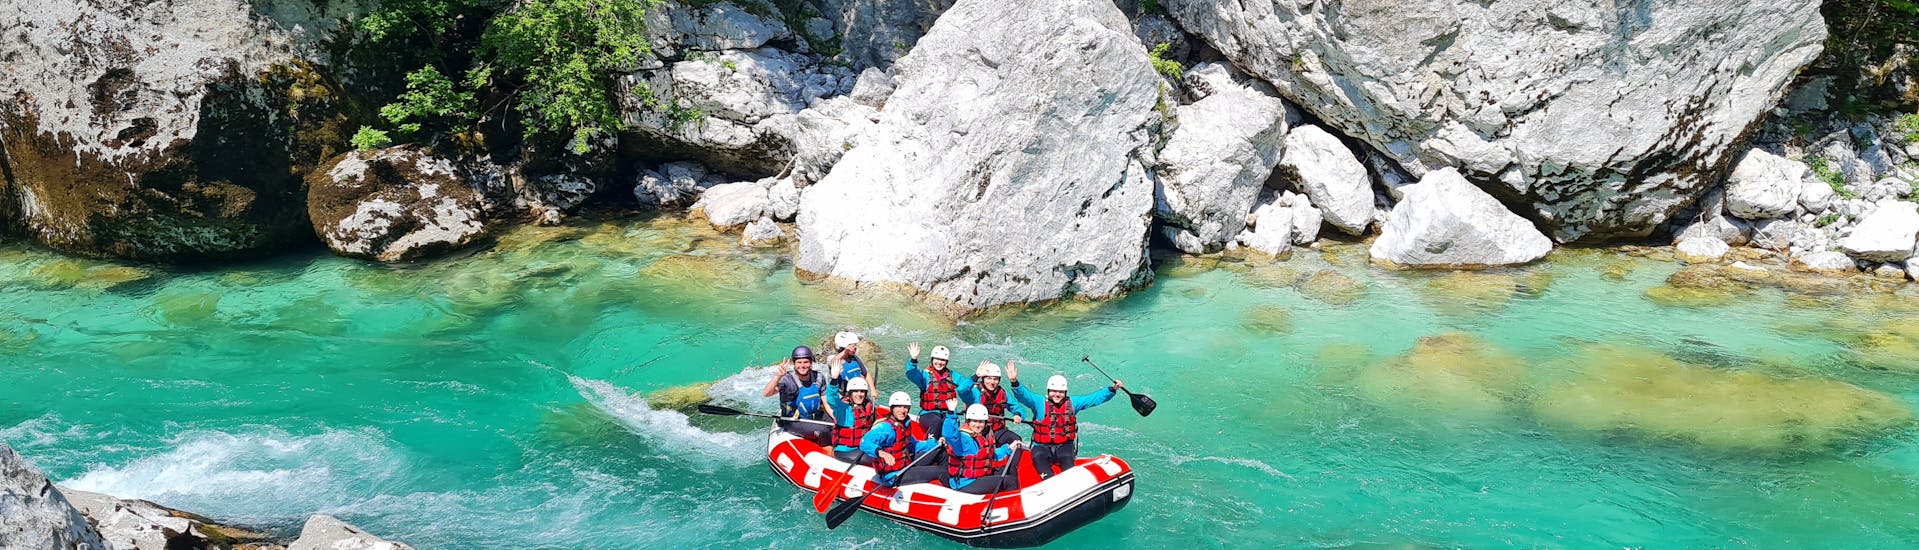 A boat with participants on the beautiful water during the Whitewater Rafting on the Soča River in Bovec.